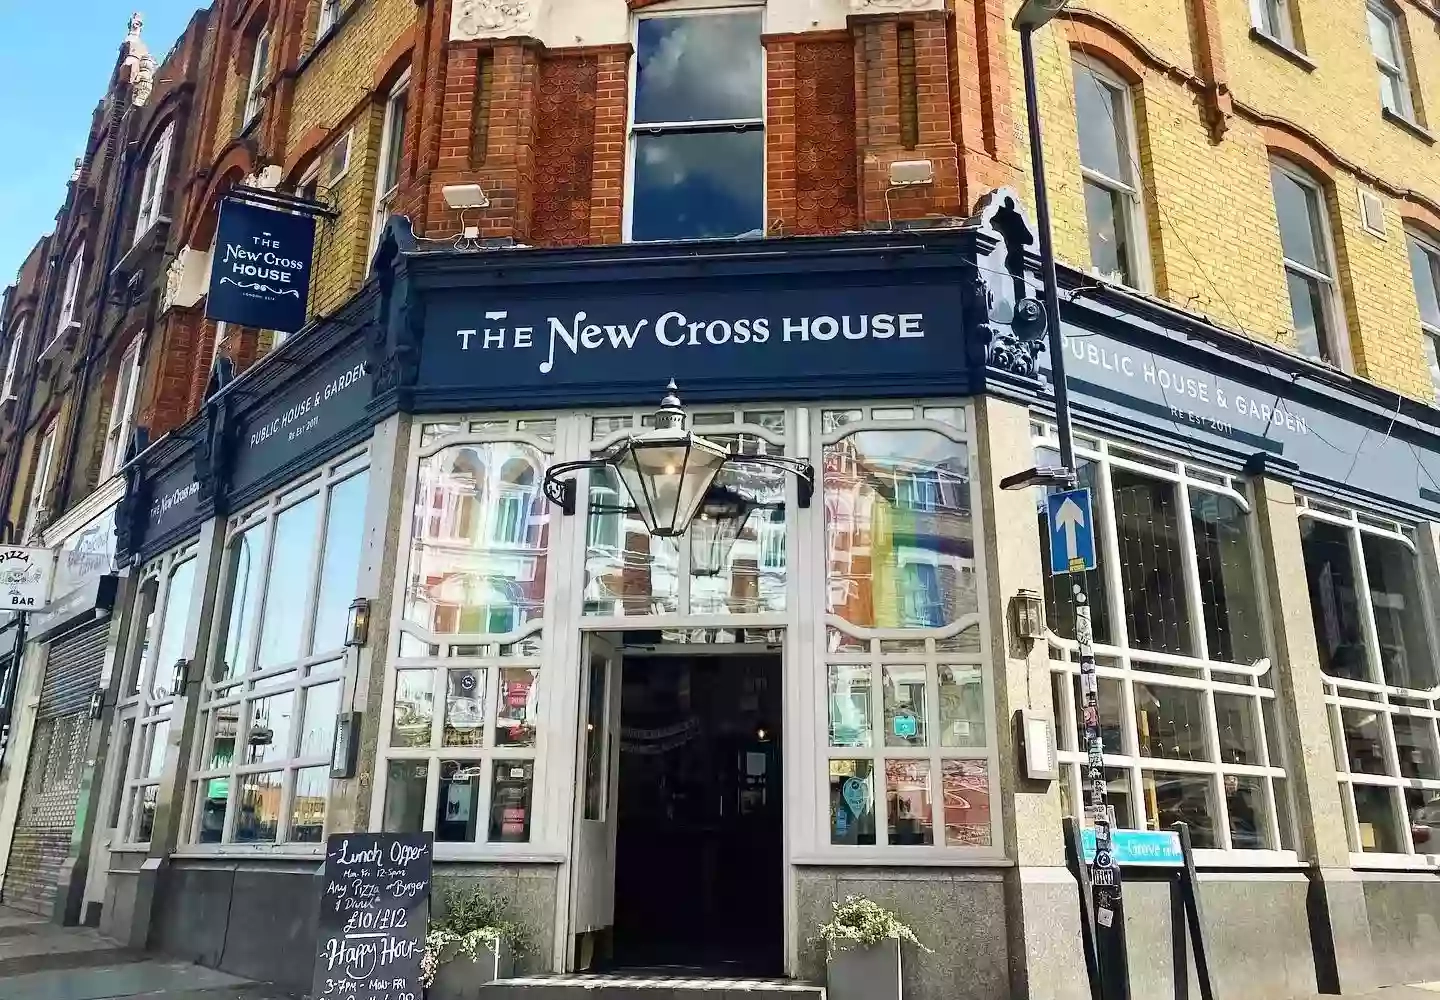 The New Cross House